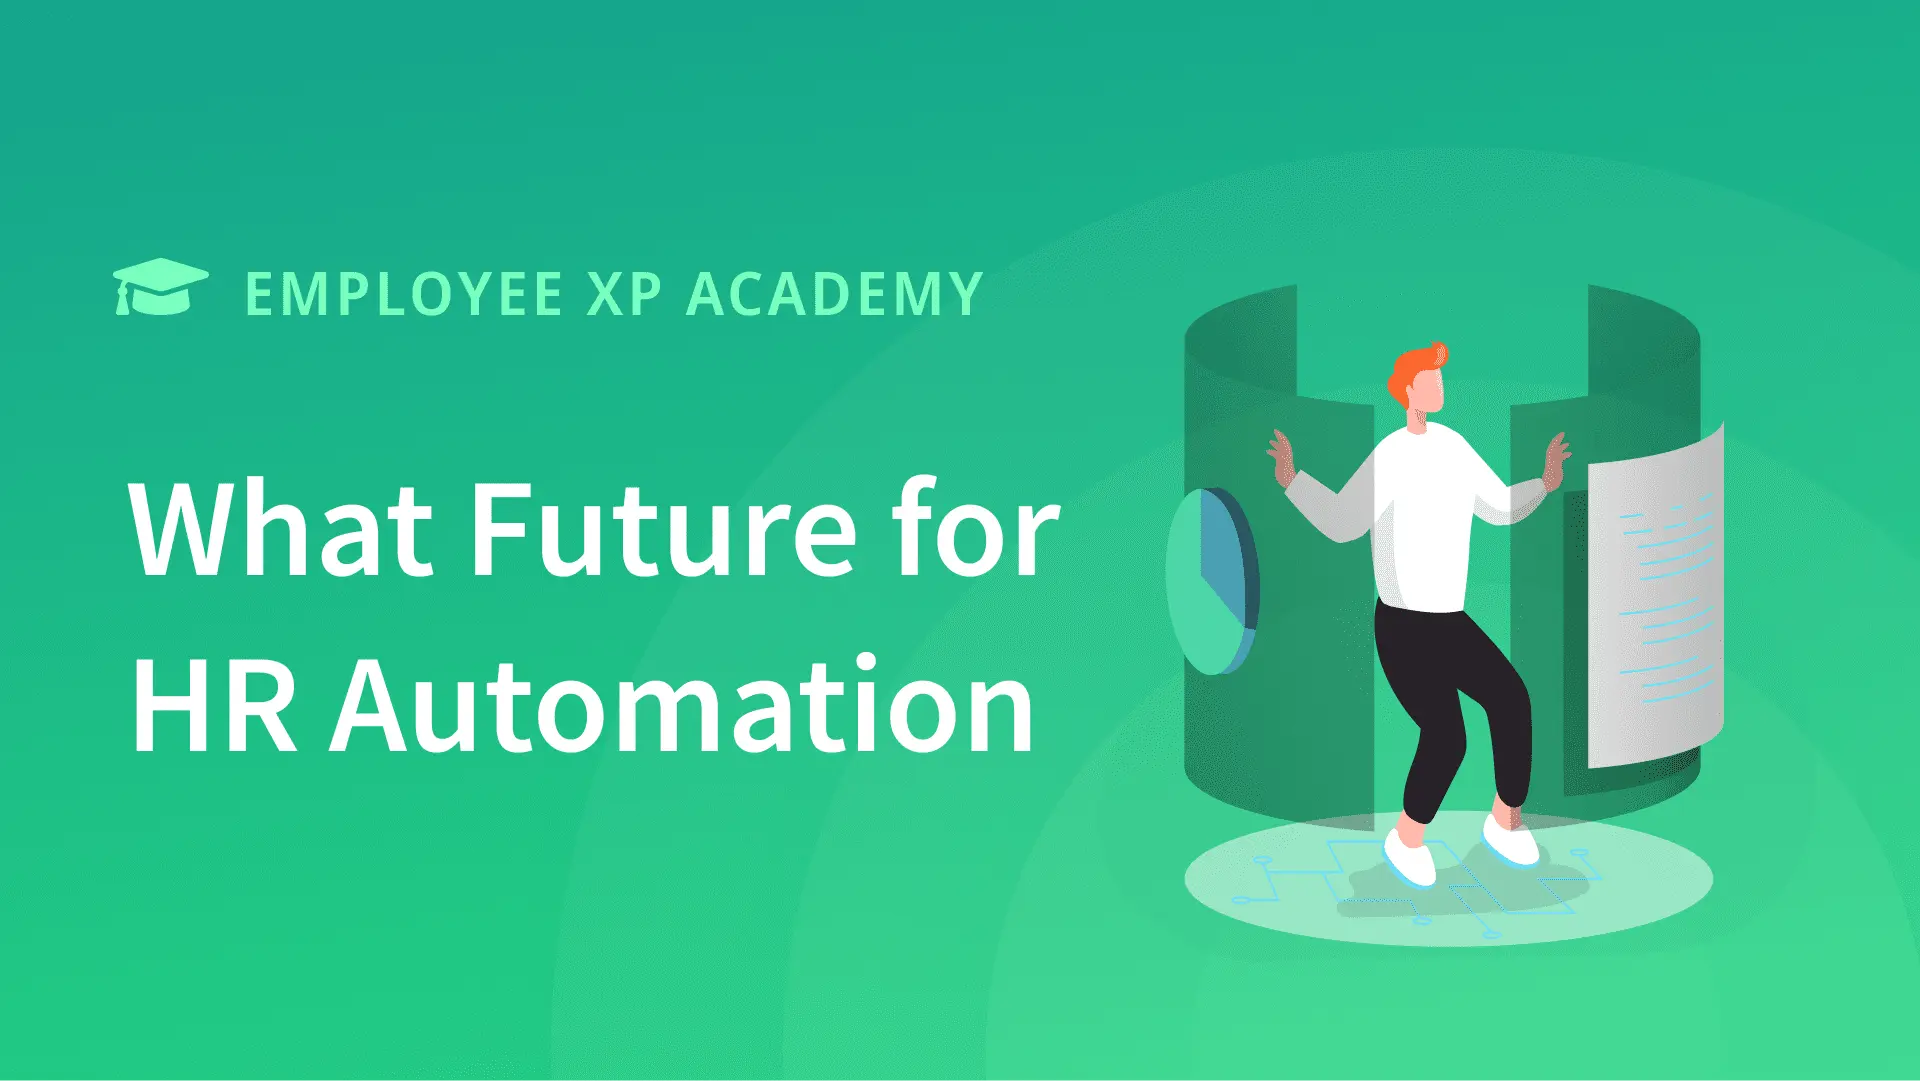 The future of HR Automation